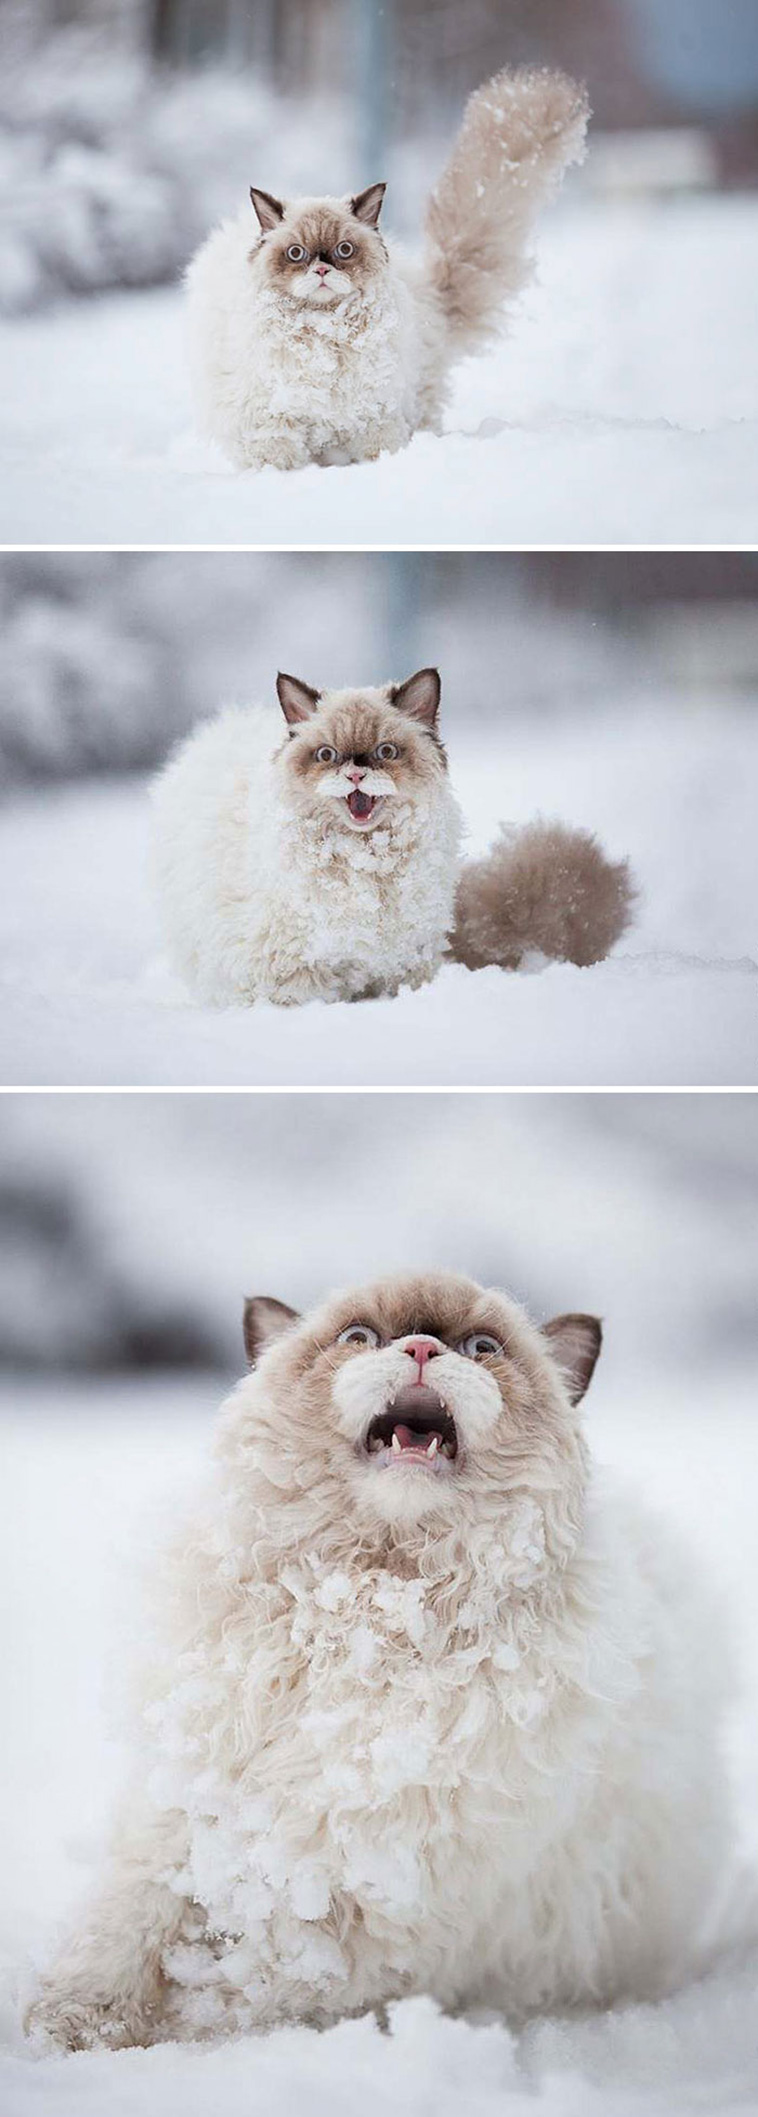 Animals Experienced Snow For The First Time